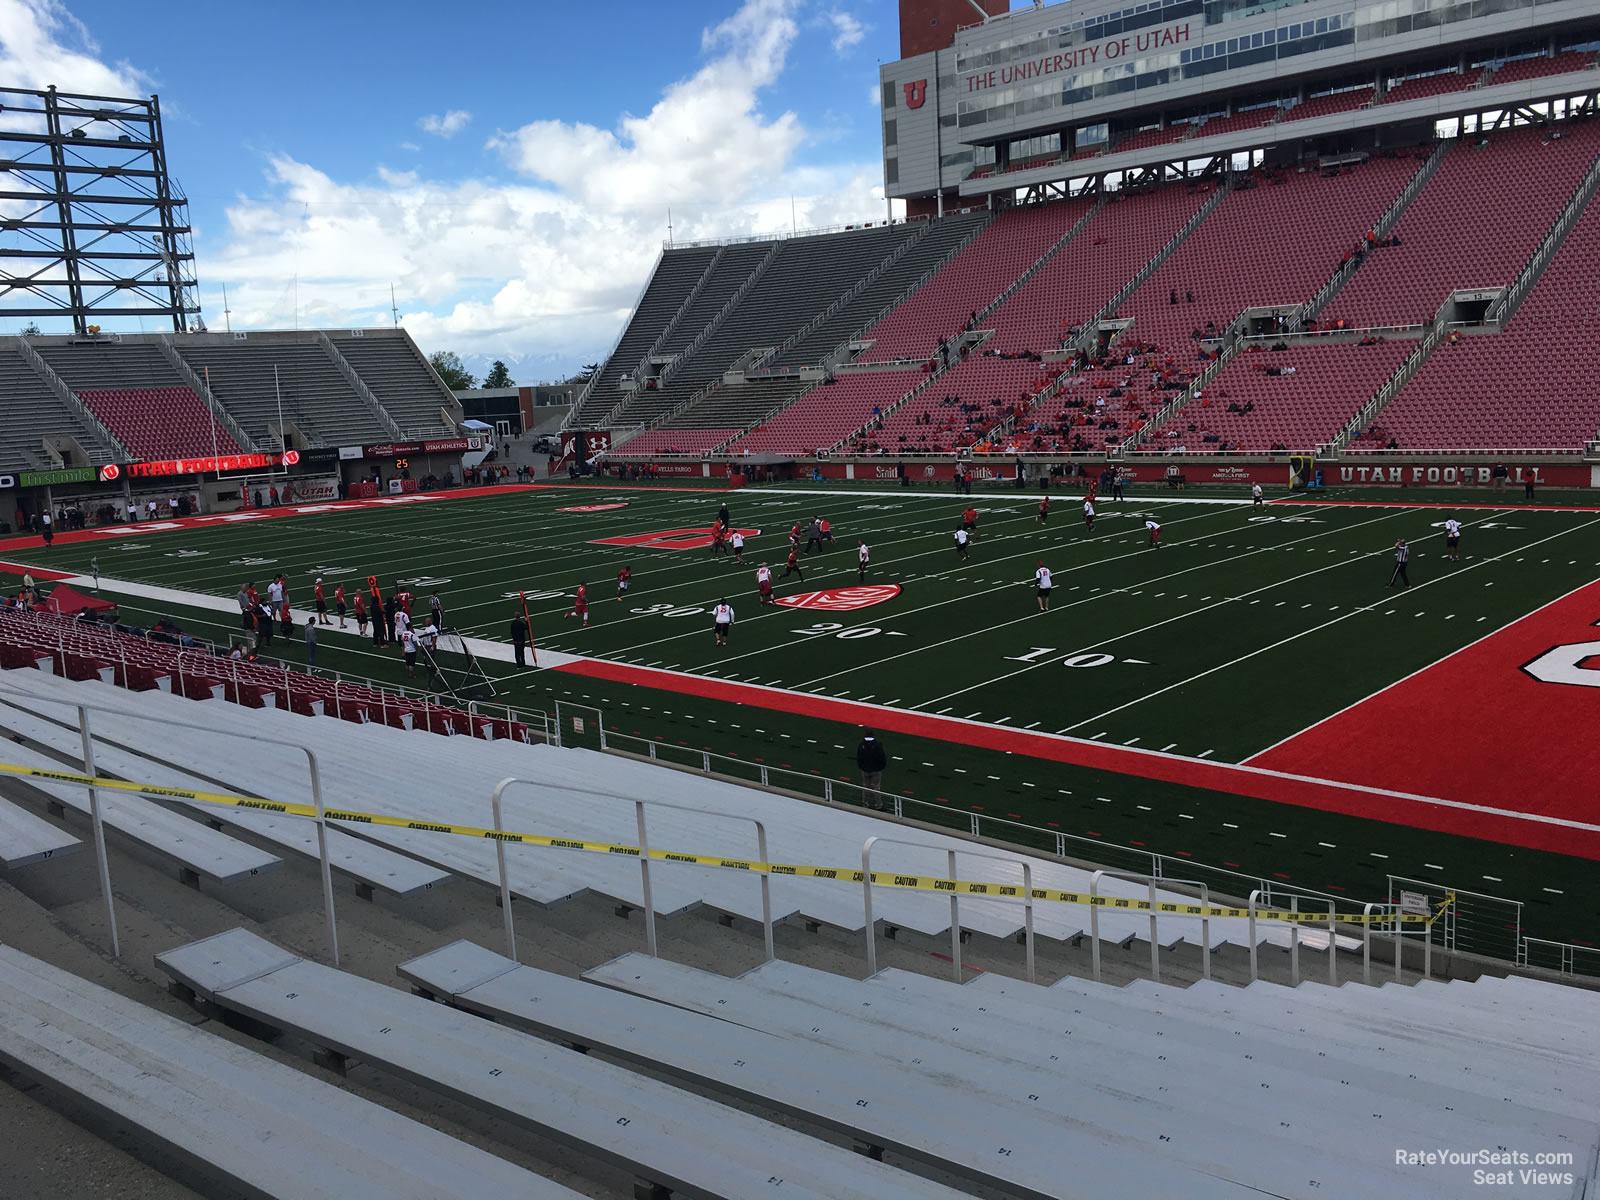 section e32, row 20 seat view  - rice-eccles stadium